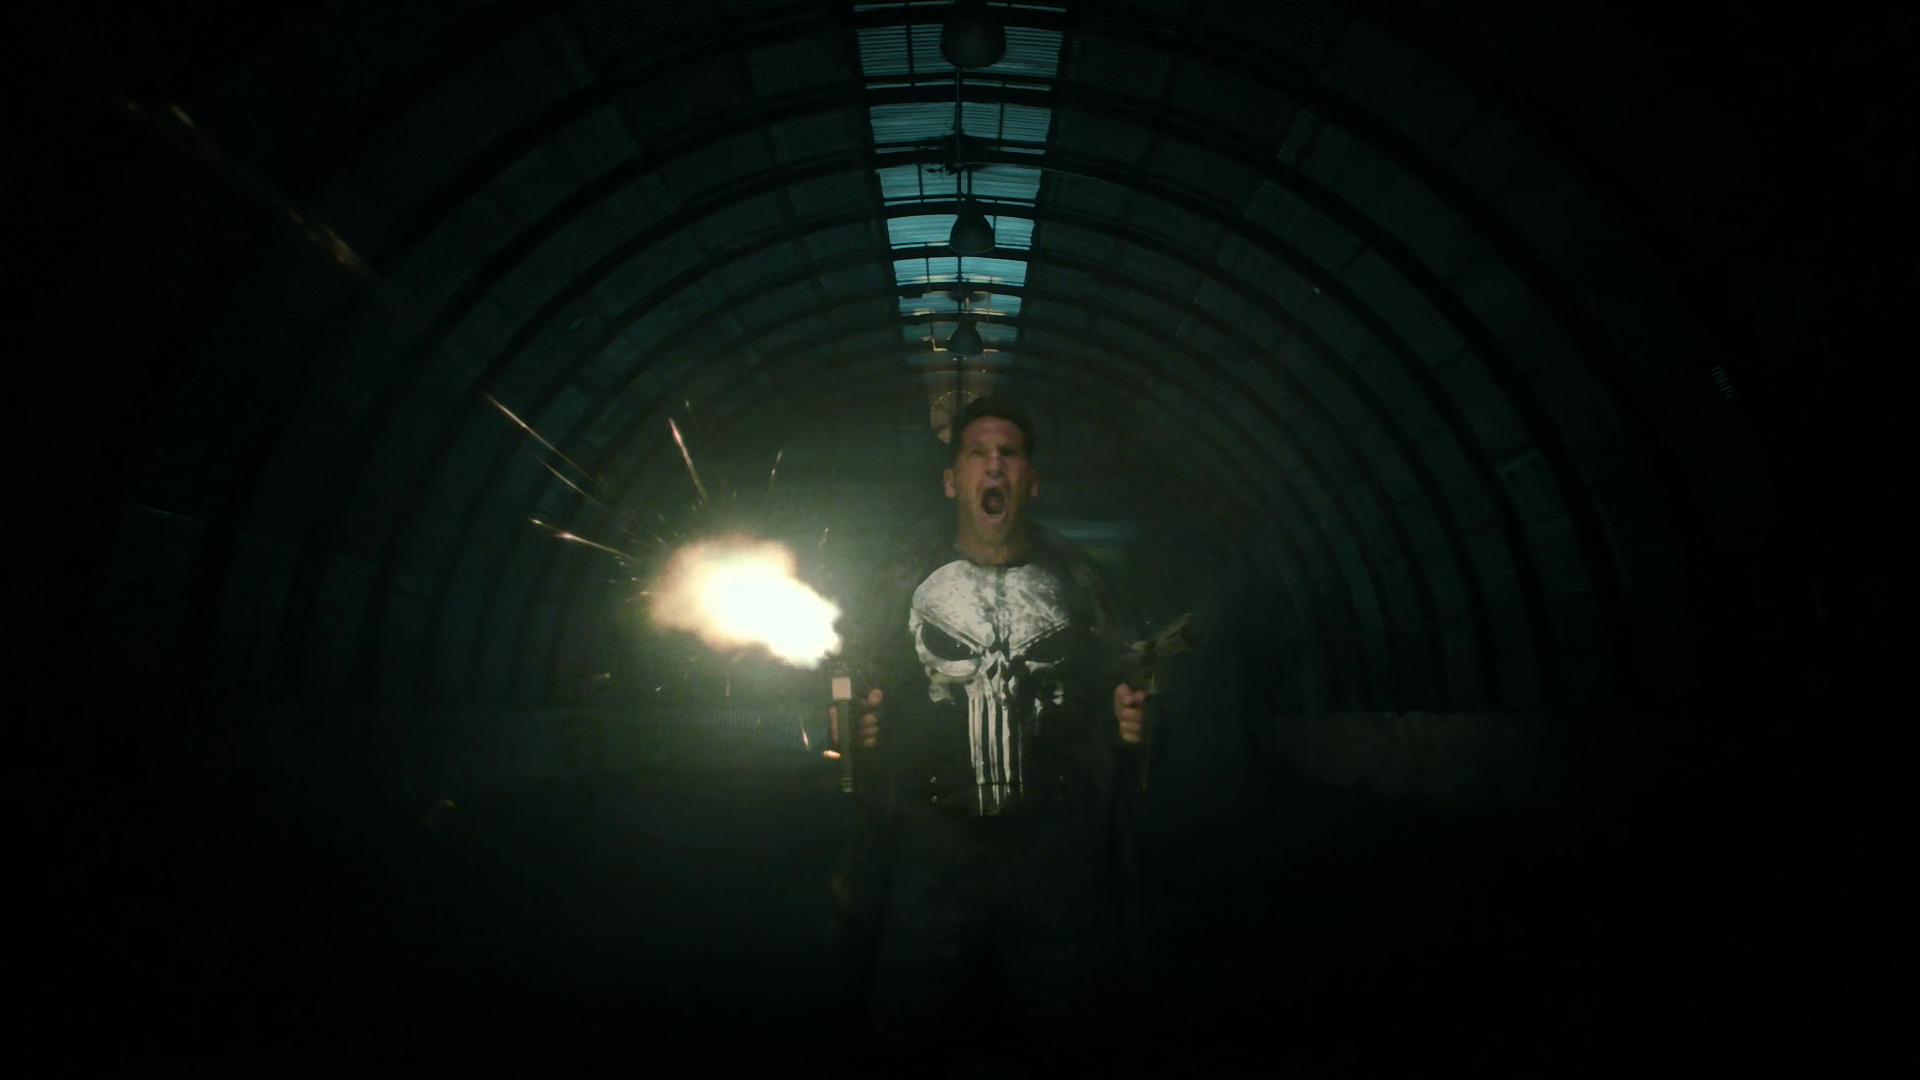 The Punisher (Jon Bernthal) makes his costumed debut in Season 2 Episode 13 "The Whirlwind" (2019), Marvel Entertainment